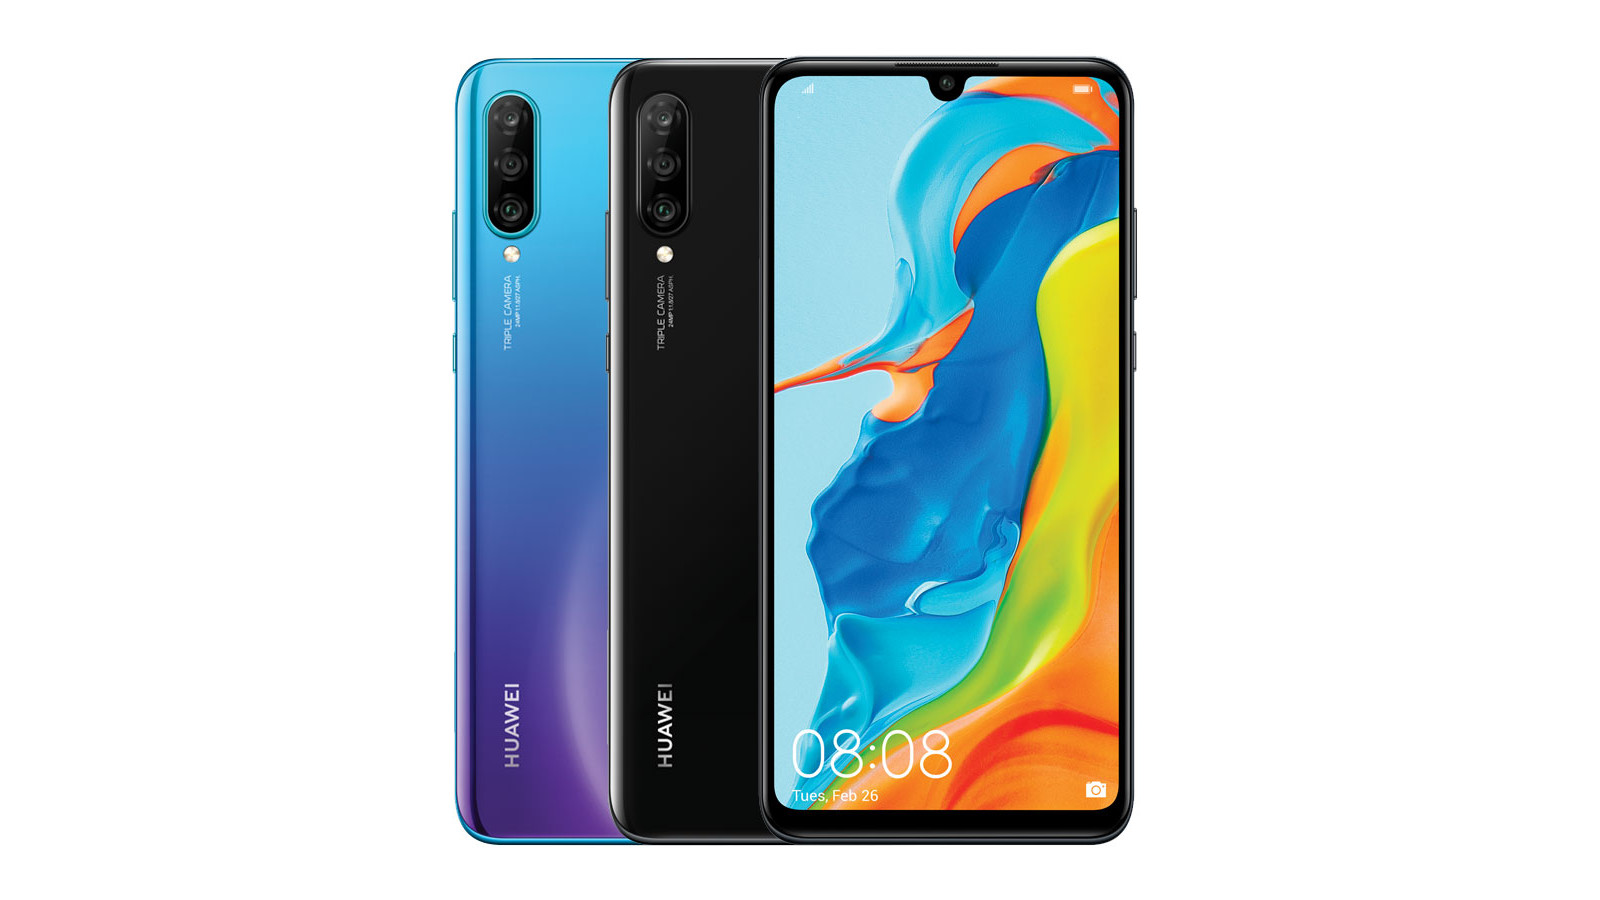 The Huawei P30 Lite render according to a South African retailer.